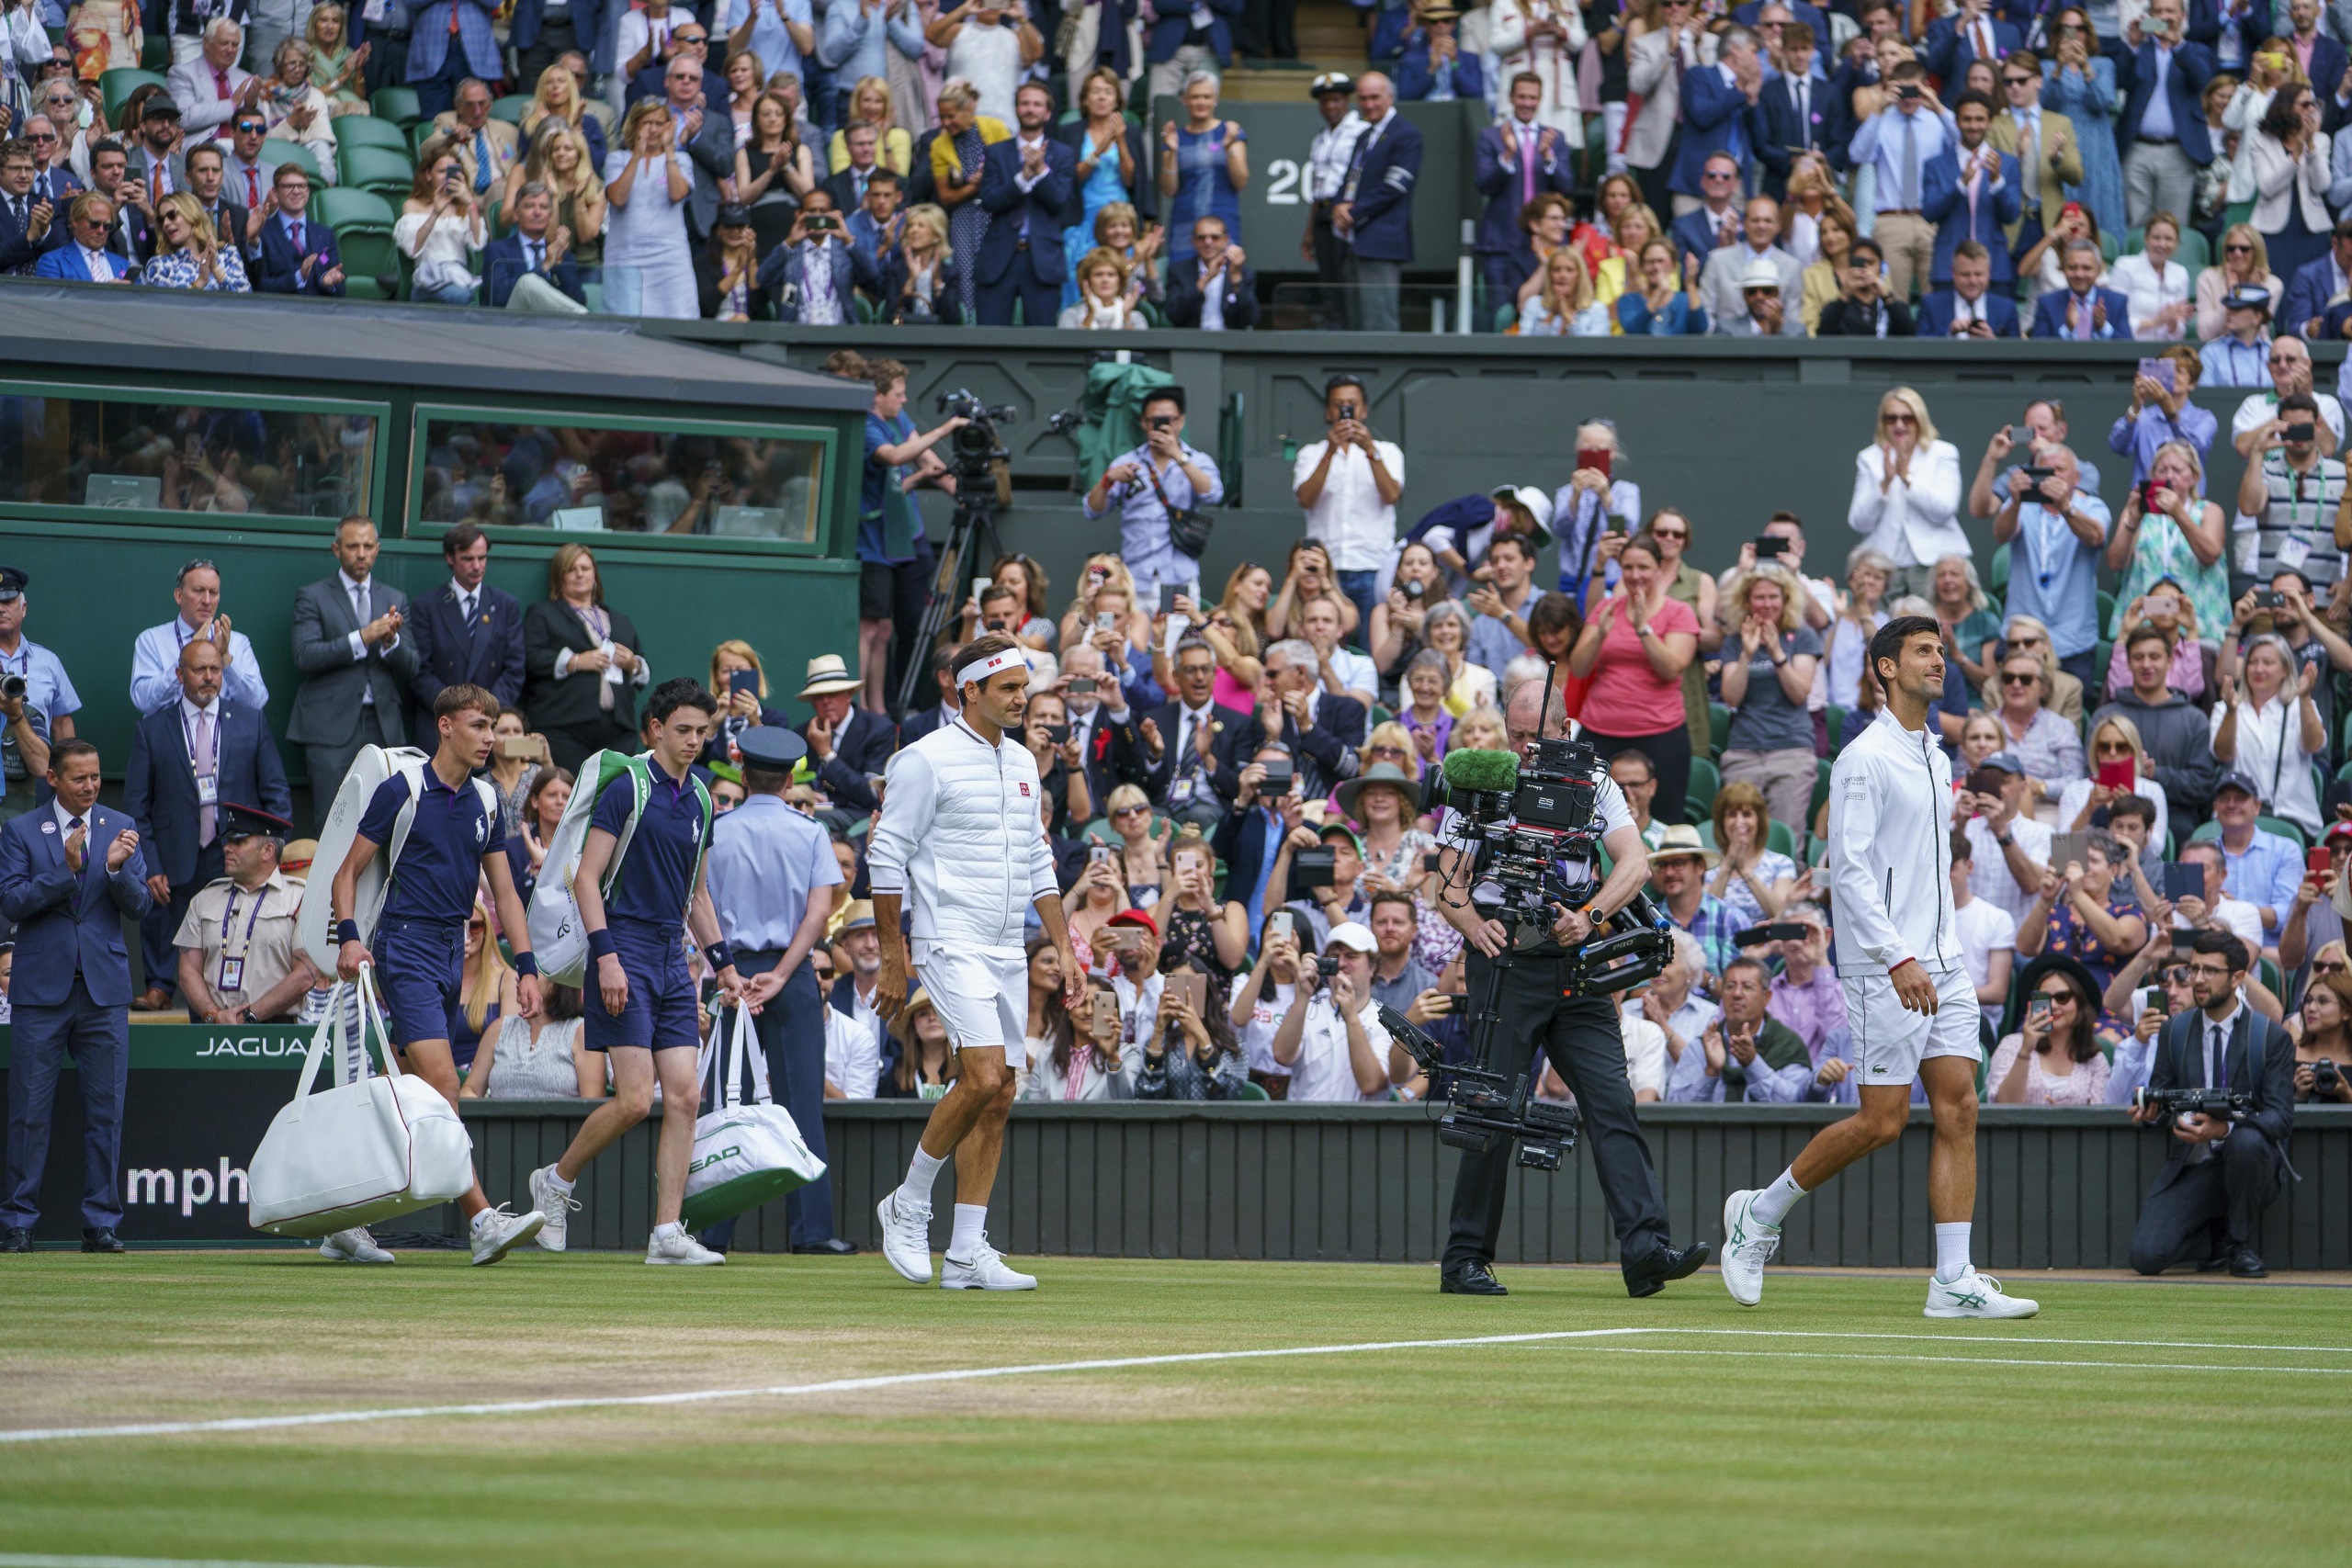 Without Live Matches, Wimbledon Serves Up More Digital Content